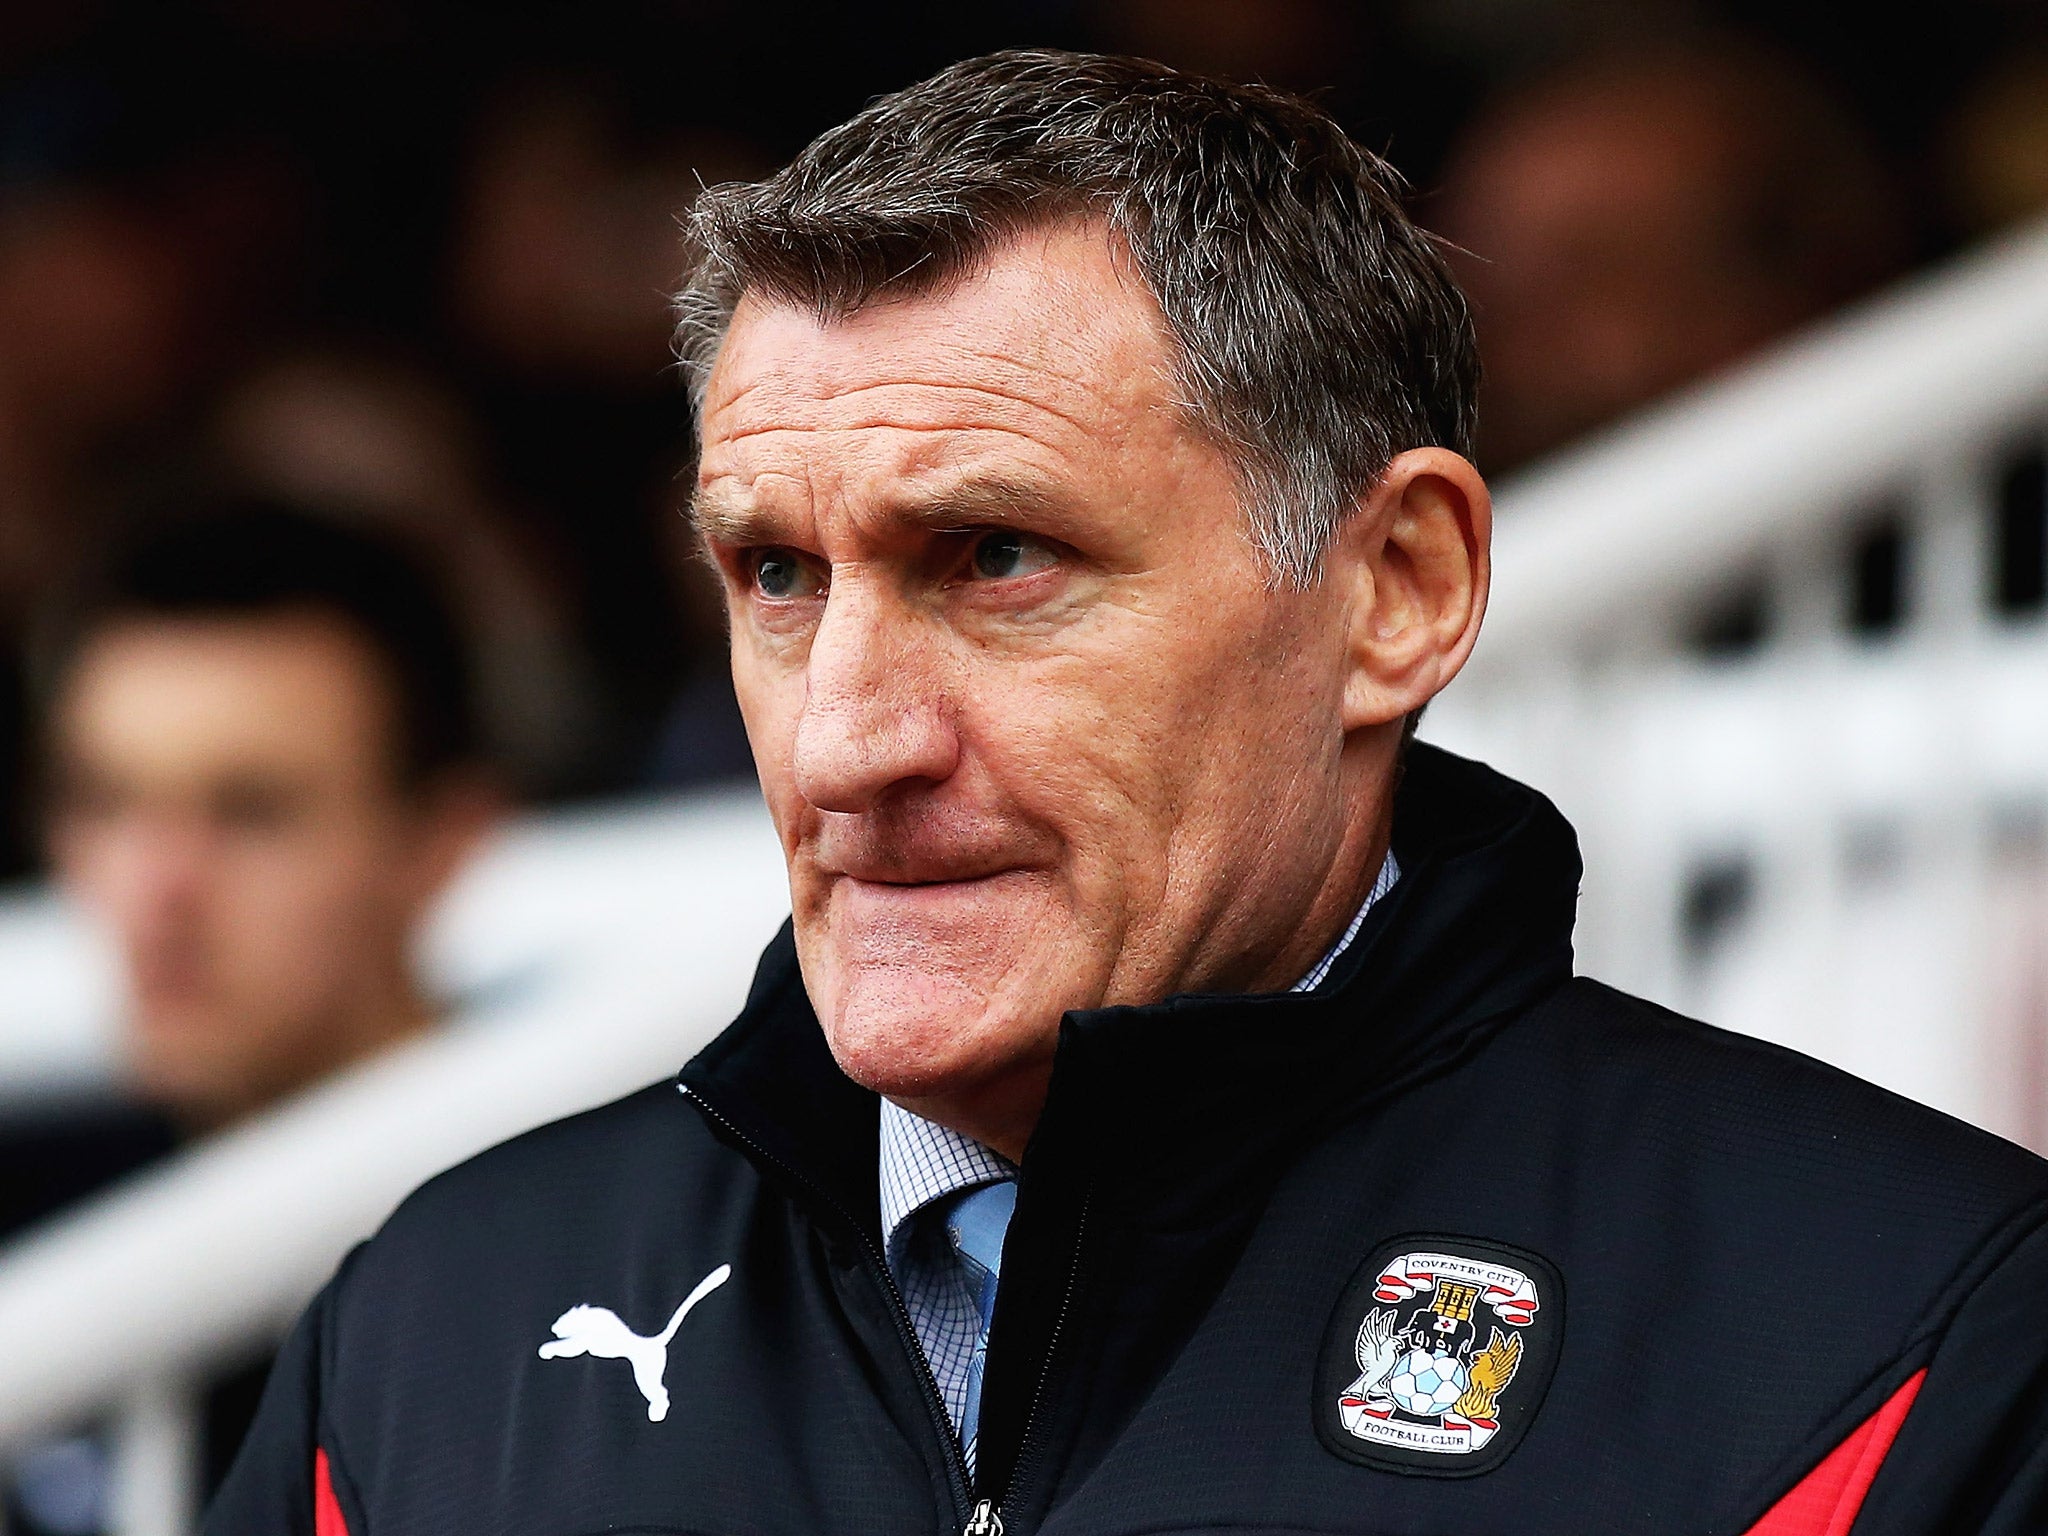 Tony Mowbray wants to give Coventry City an identity after Wasps took over their stadium